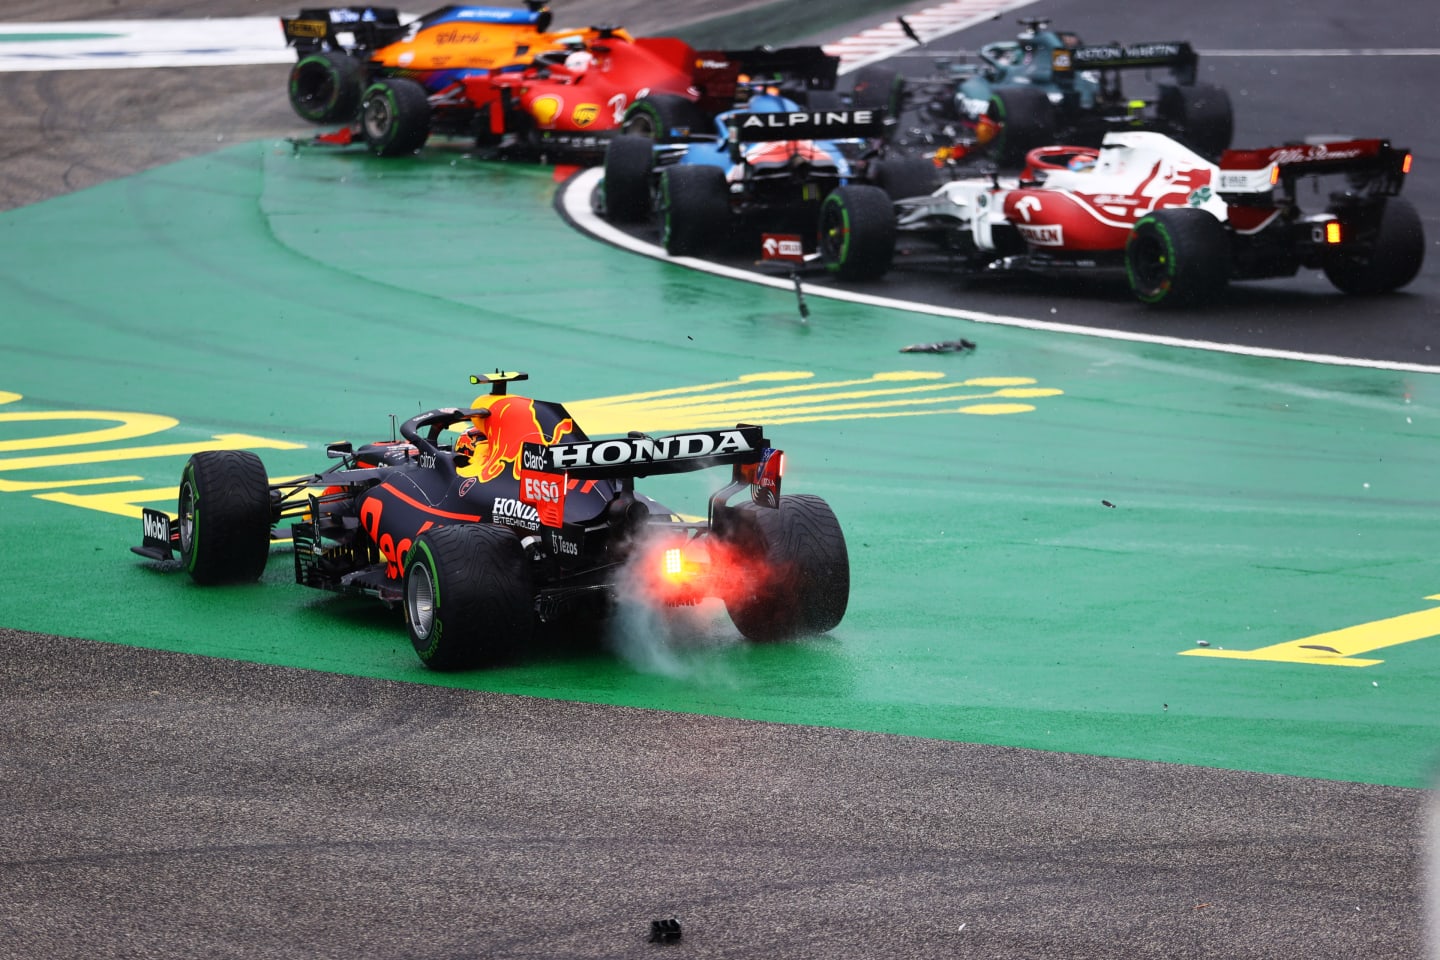 BUDAPEST, HUNGARY - AUGUST 01: Sergio Perez of Mexico driving the (11) Red Bull Racing RB16B Honda runs wide at the start as cars tangle ahead of him during the F1 Grand Prix of Hungary at Hungaroring on August 01, 2021 in Budapest, Hungary. (Photo by Bryn Lennon/Getty Images)